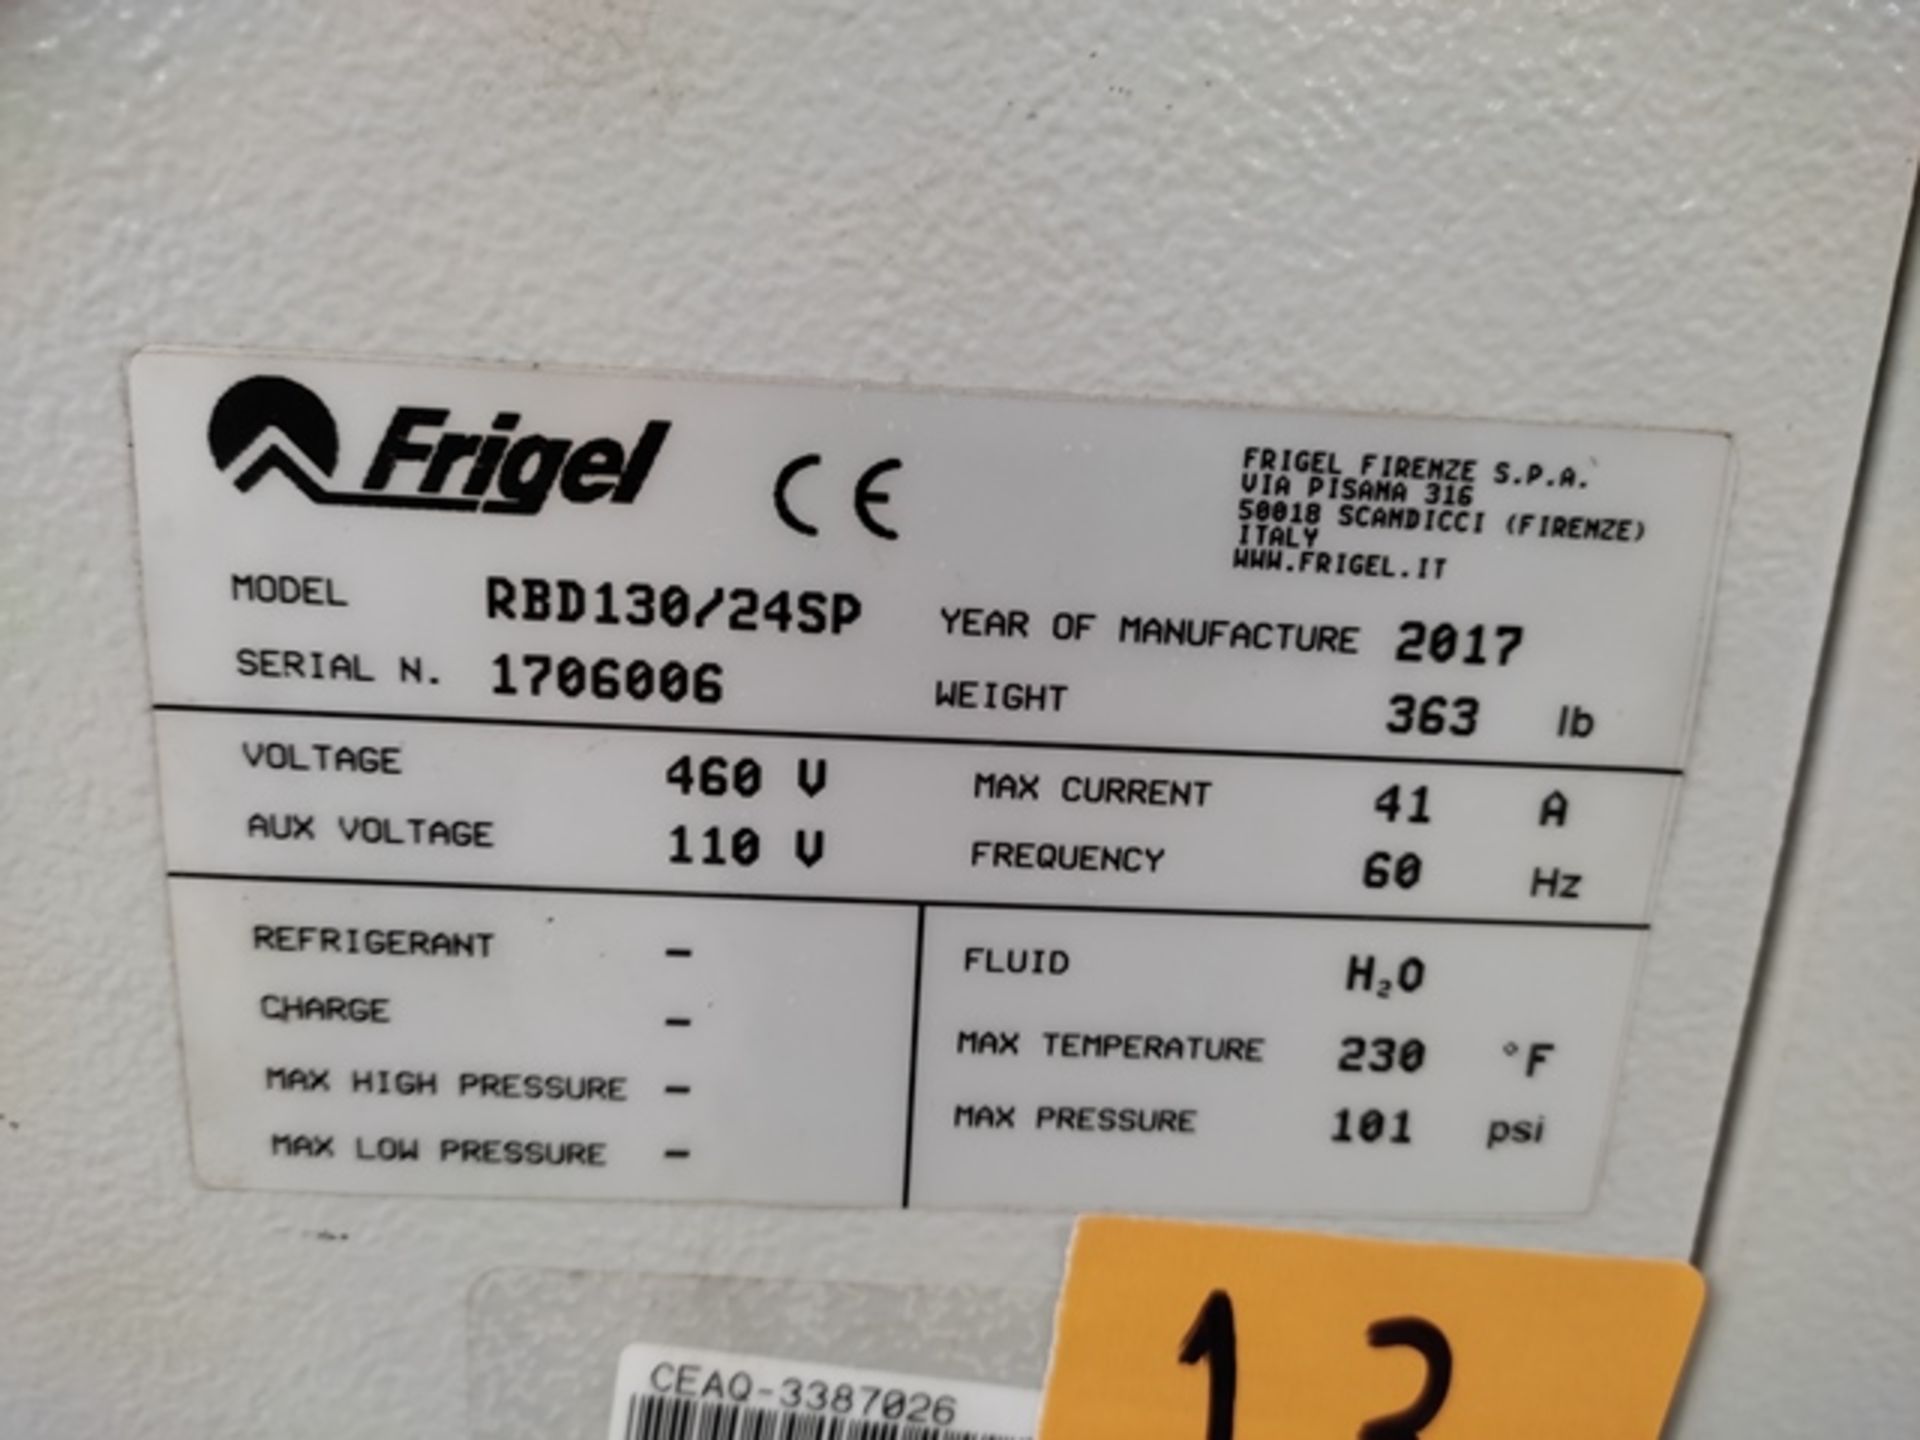 Lot of: (3) Frigel RBD130/24 SP 24 KW Flow Booster Temperature Controller, Year: 2017; - Image 16 of 16